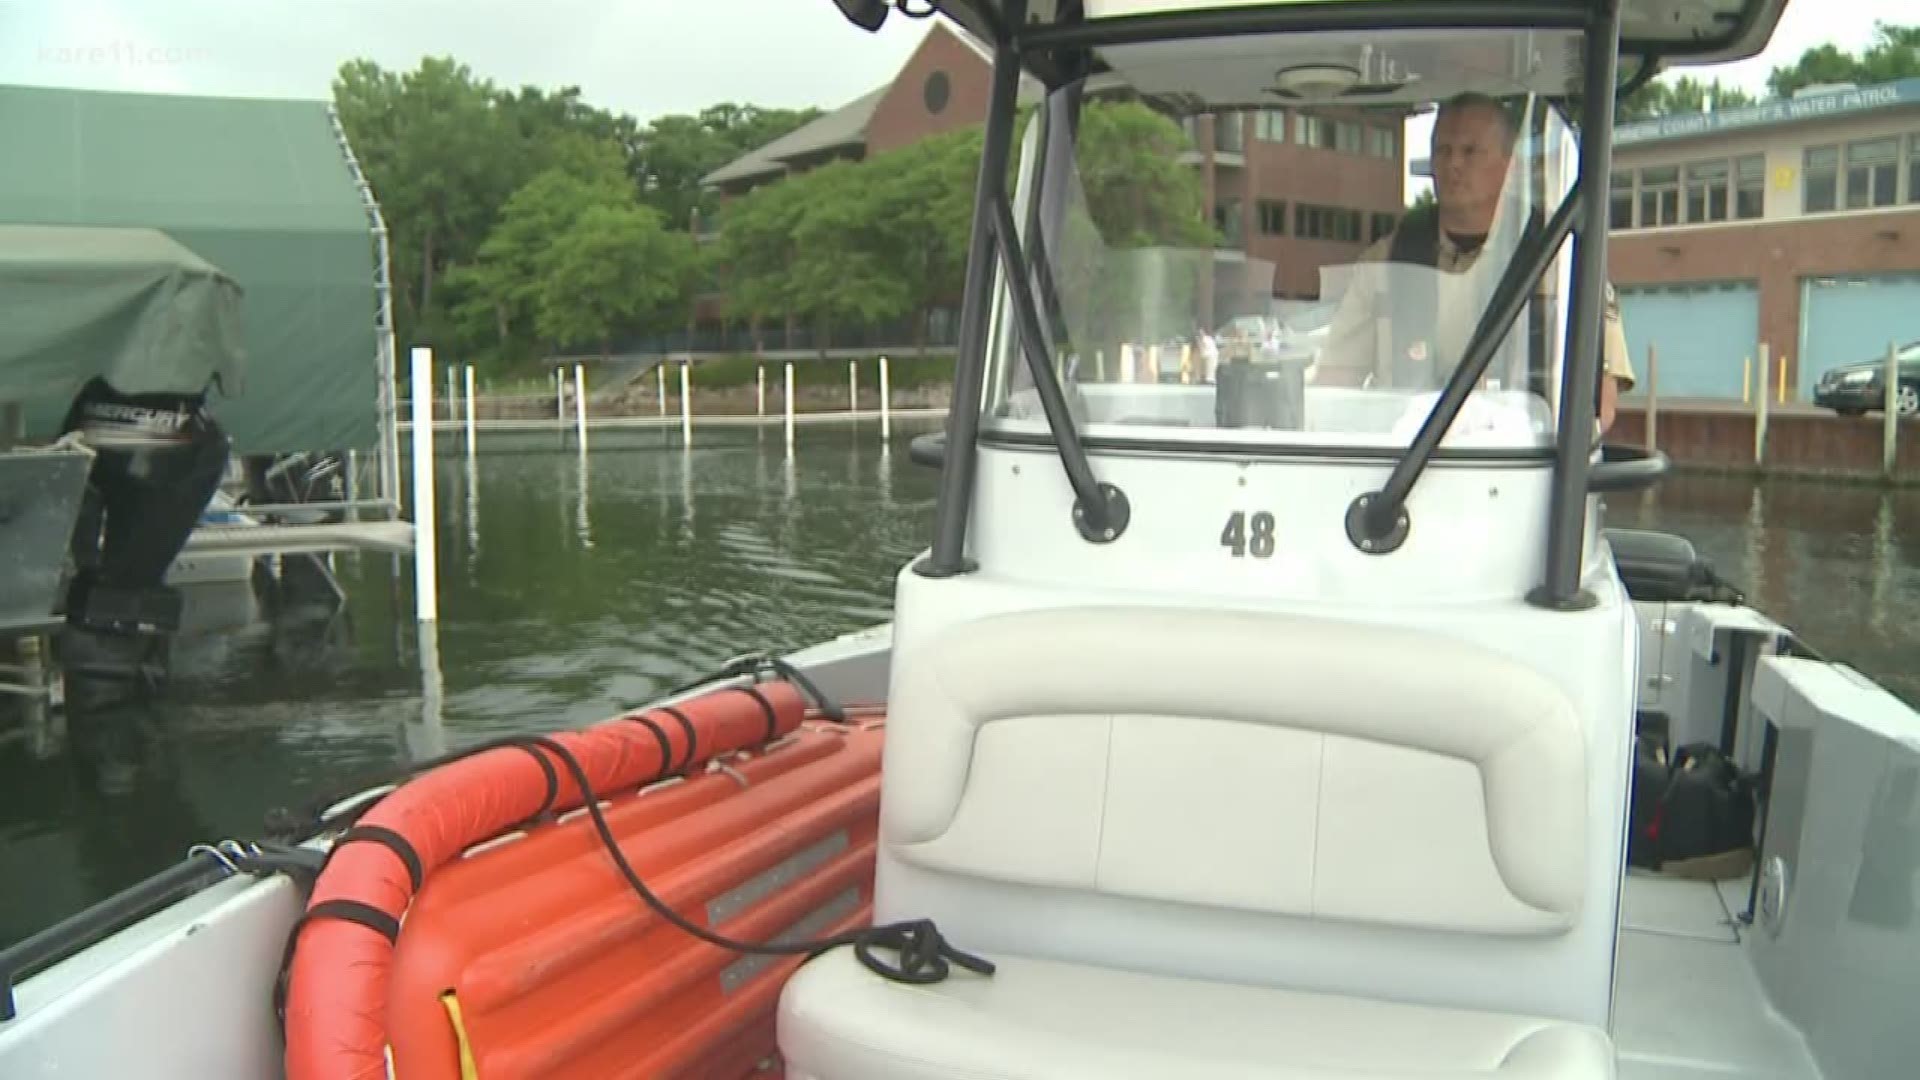 Some quick tips to keep you safe when you're out on the water.